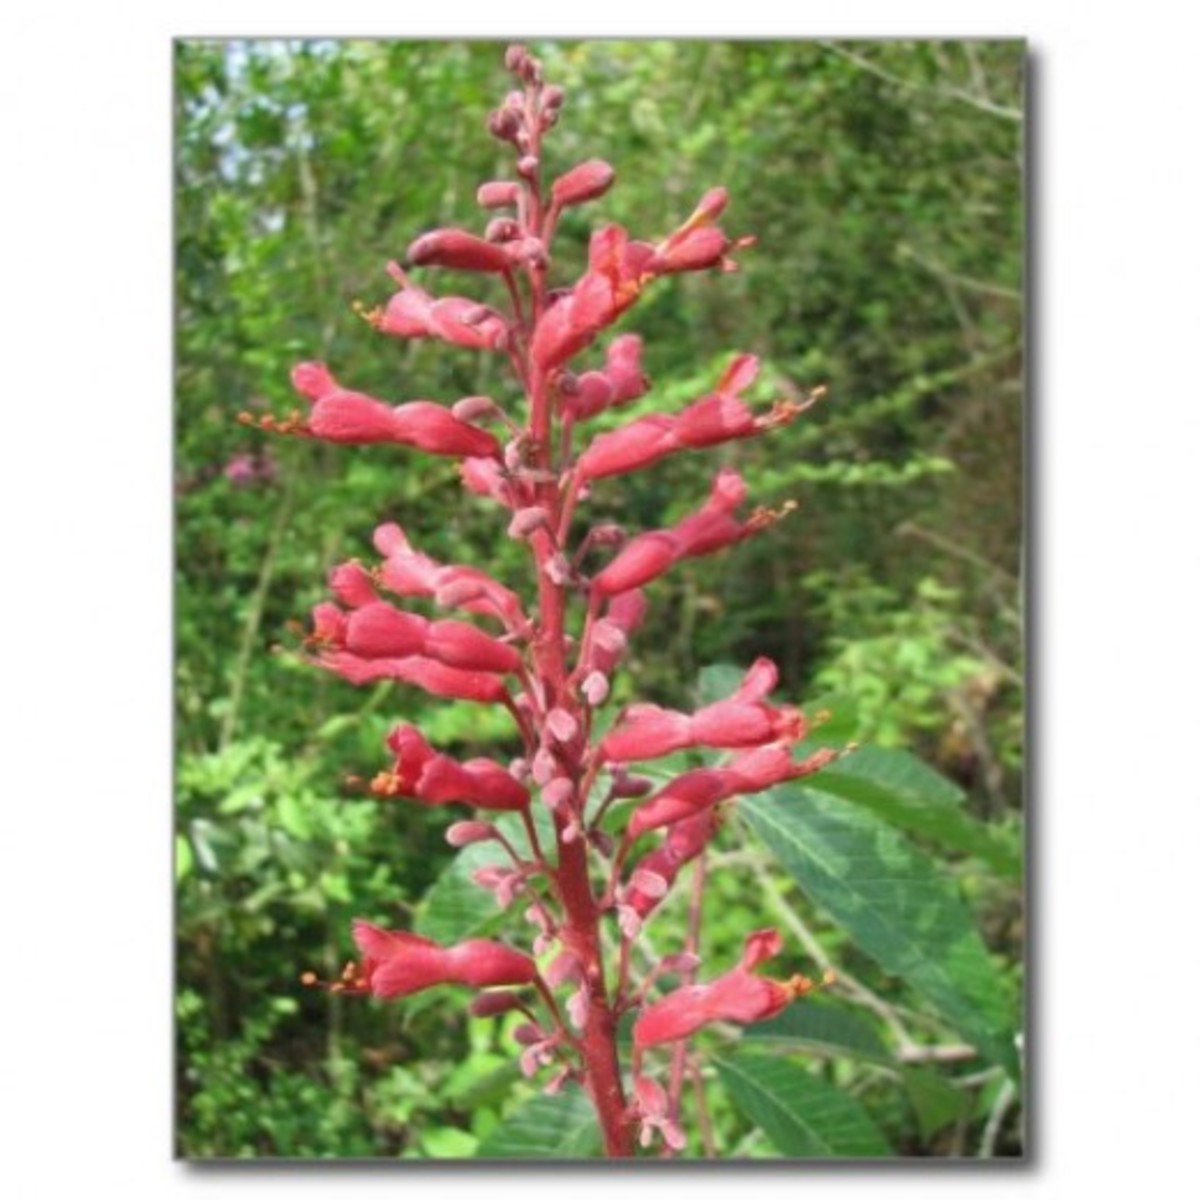 Nectar-rich flowers of native red buckeye trees are another favorite of hummingbirds that breeds true.